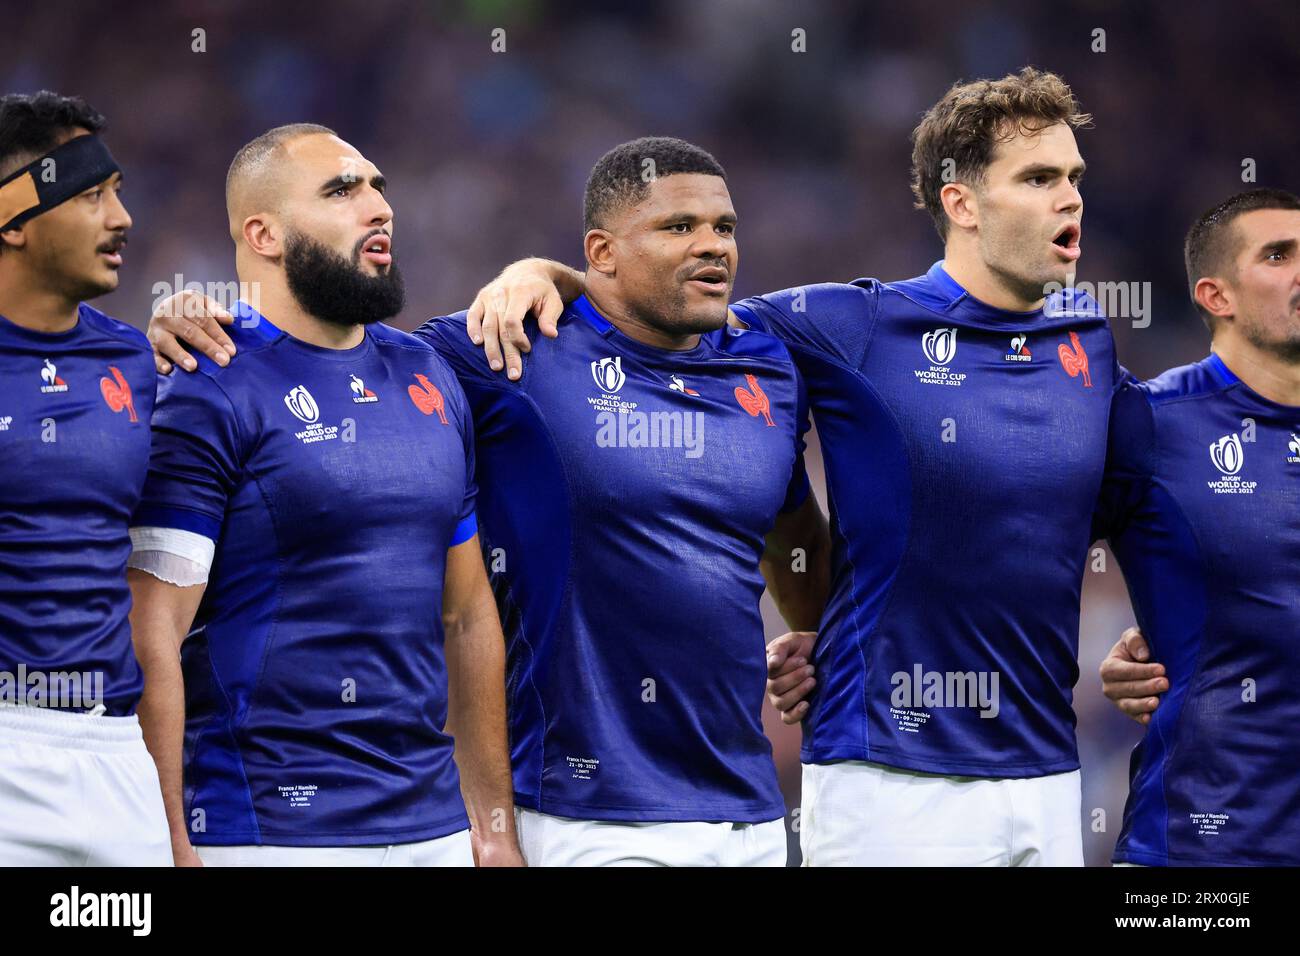 Reda Wardi #17 of France, Jonathan Danty #12 of France, Damian Penaud #14  of France during the Rugby World Cup match between France and Namibia at  Stade de Marseille on September 21,